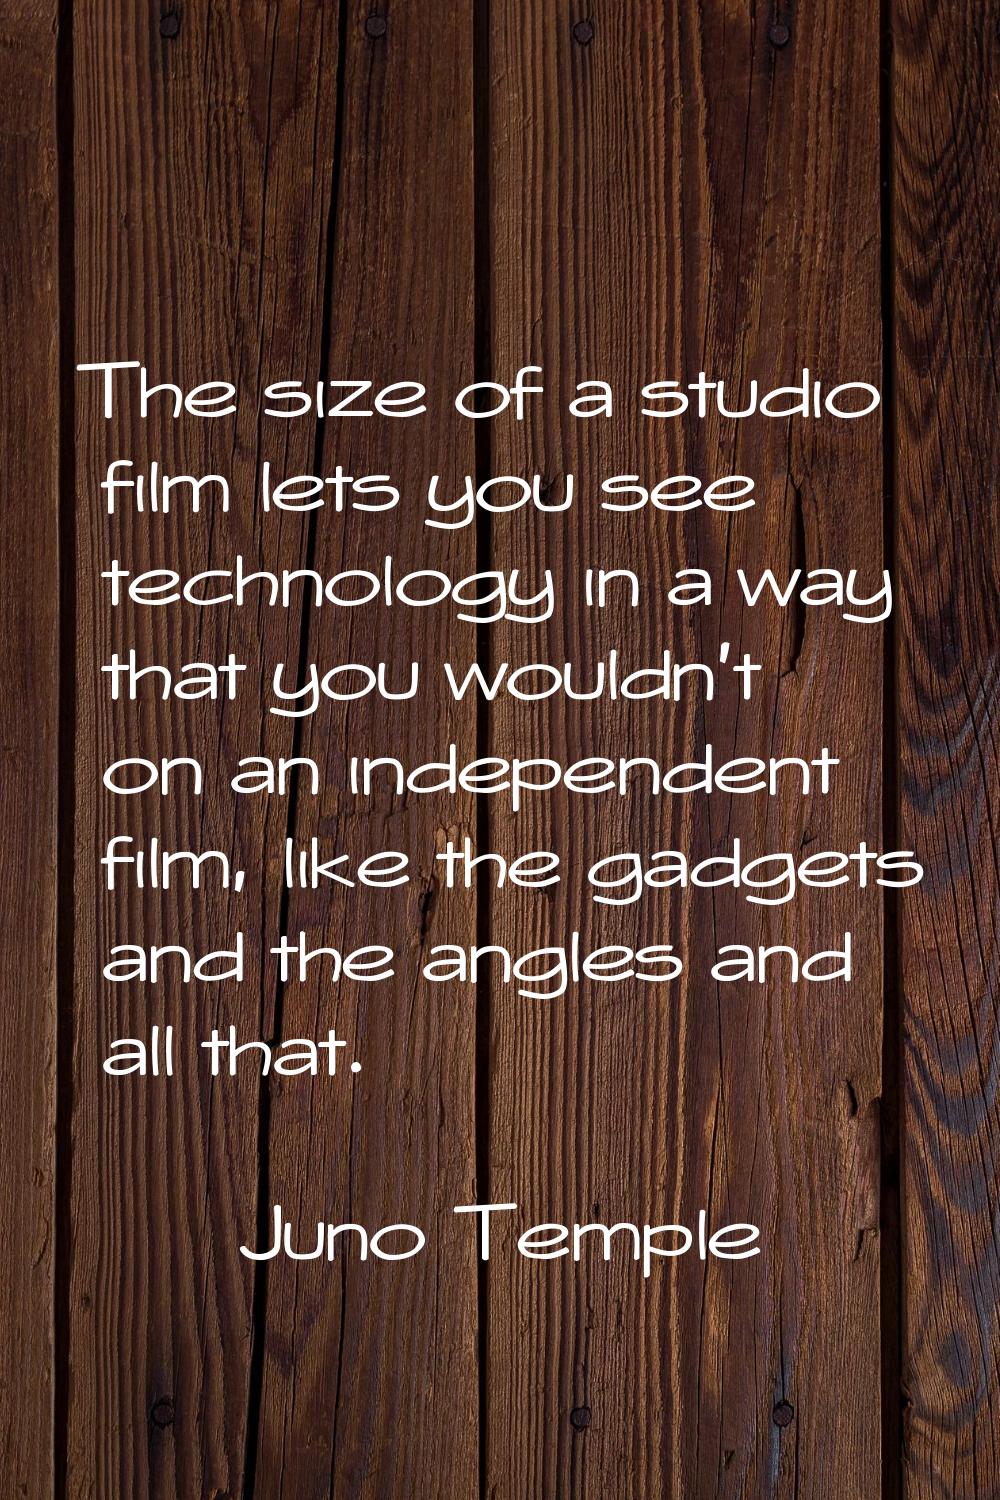 The size of a studio film lets you see technology in a way that you wouldn't on an independent film